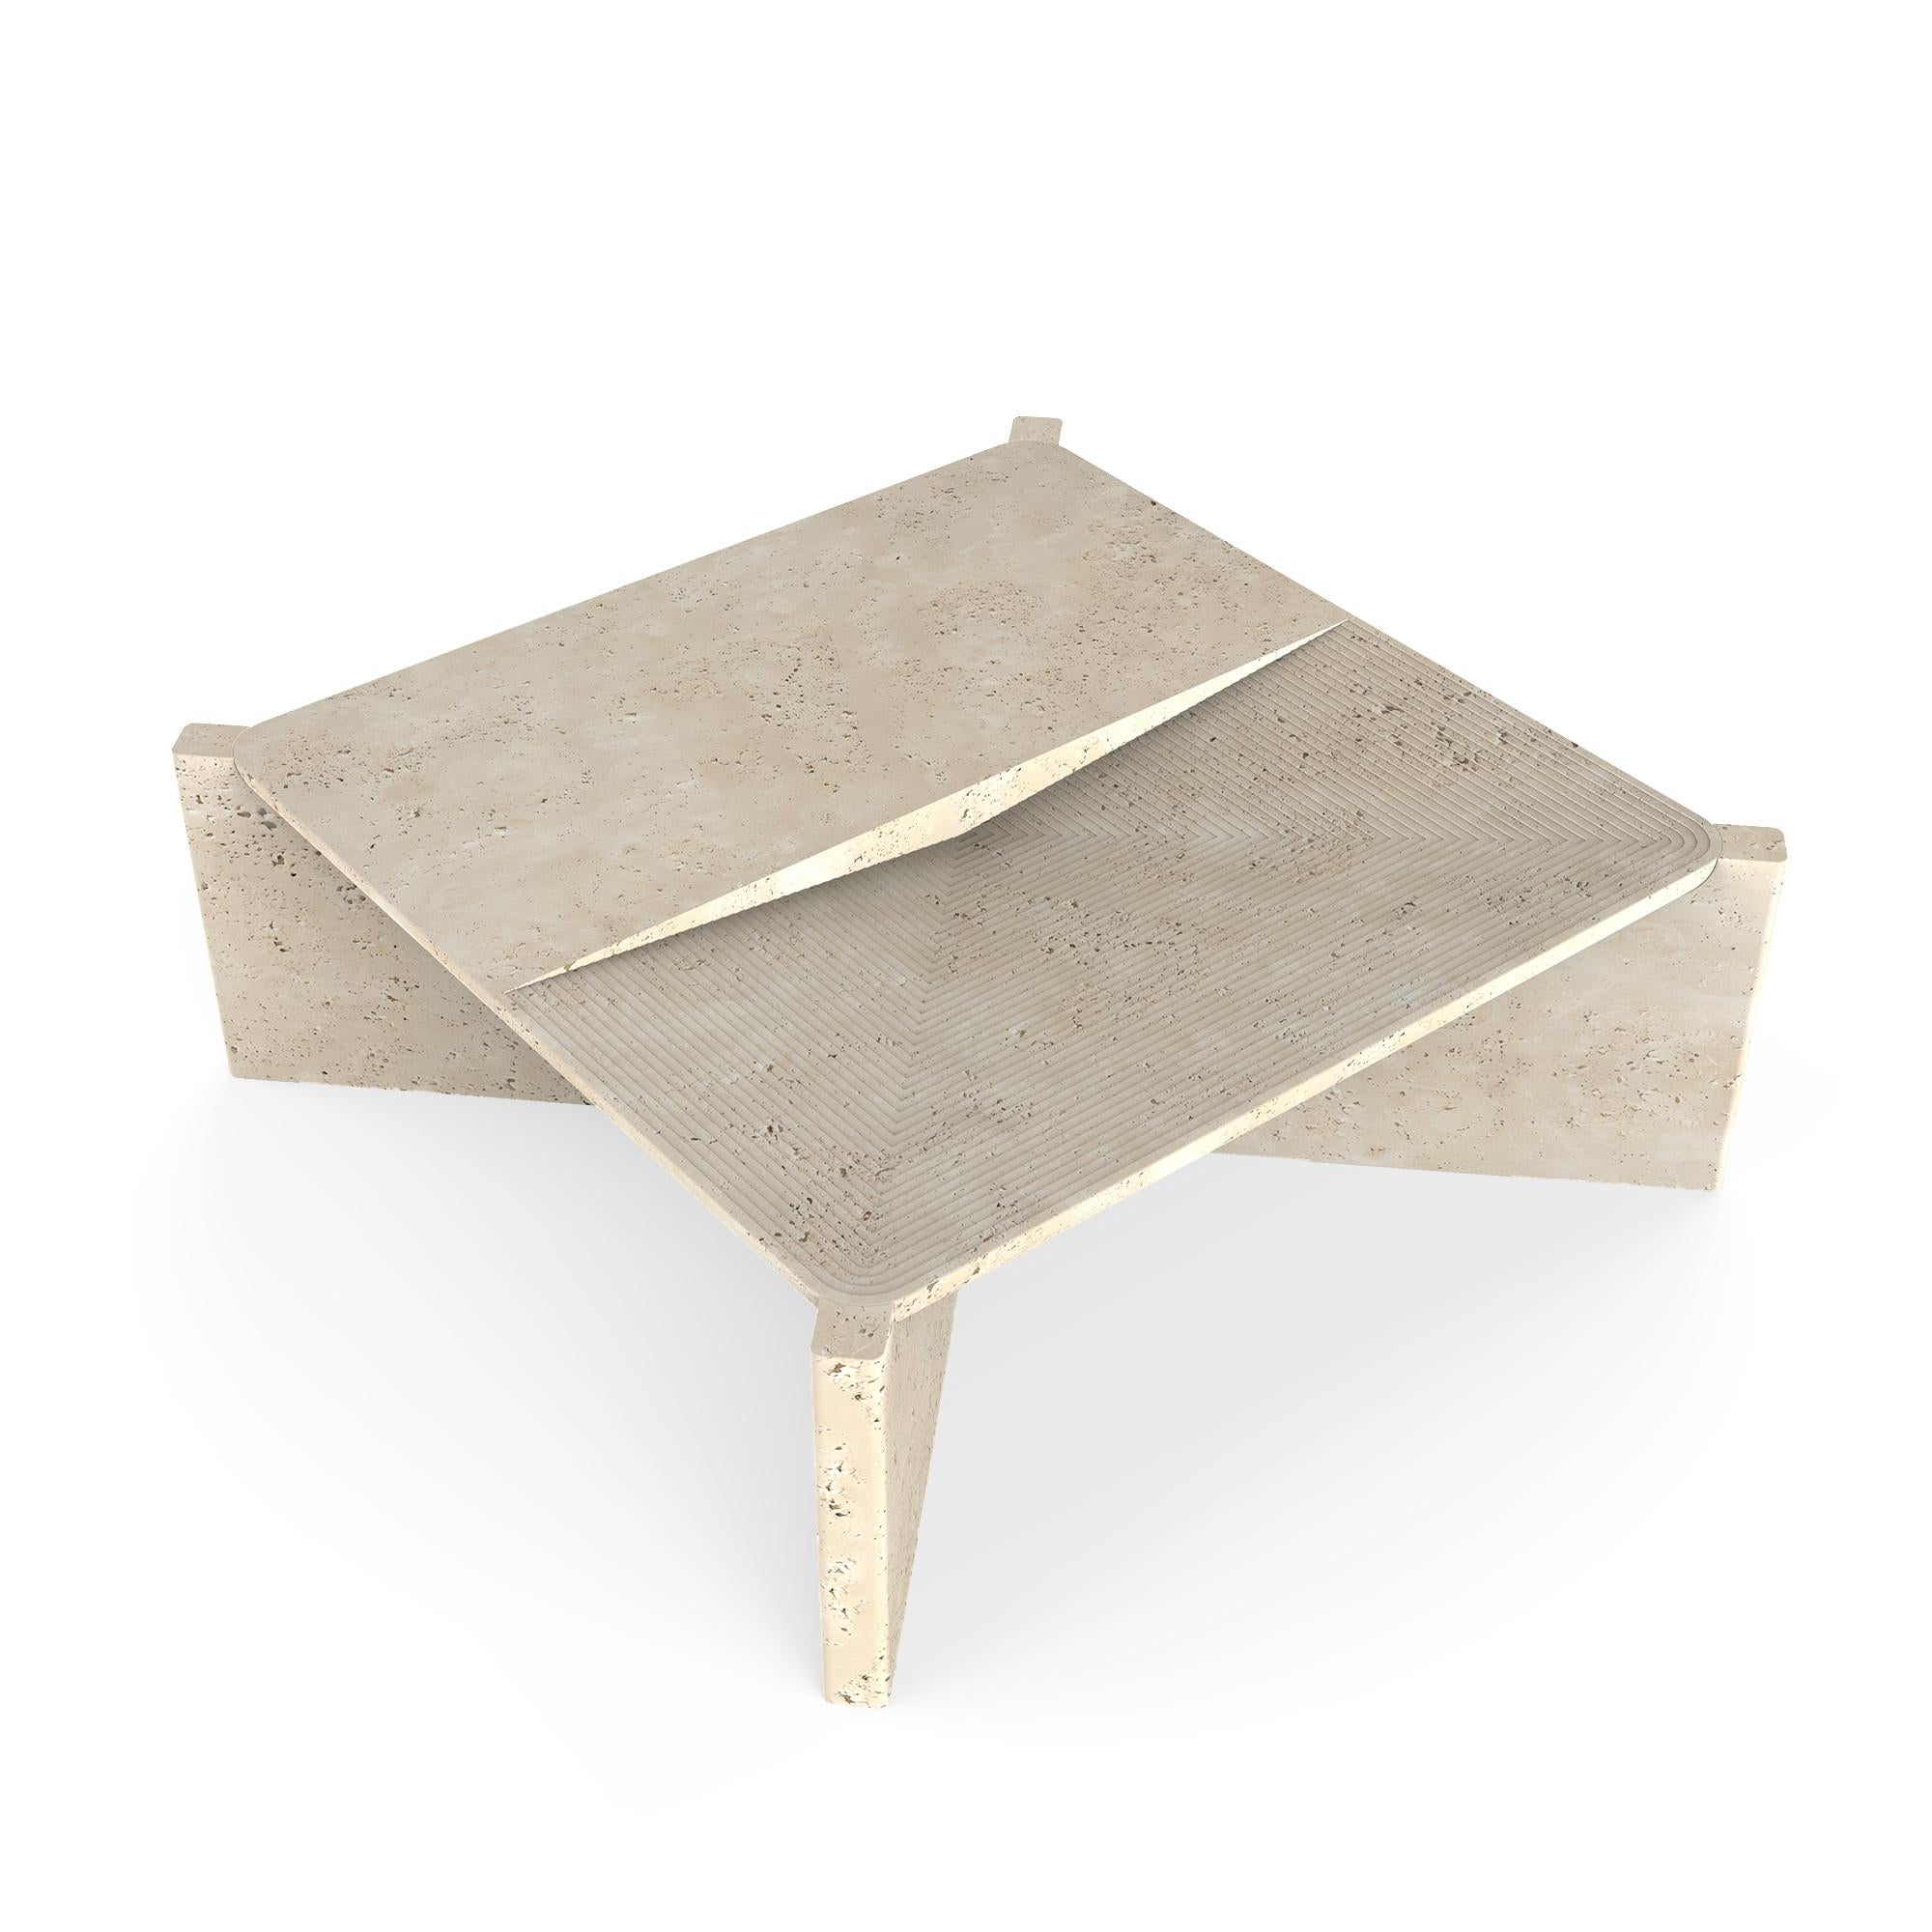 Carved Arkhe No 1 Coffee Table Square Travertine, Modern Sculptural by Fulden Topaloglu For Sale